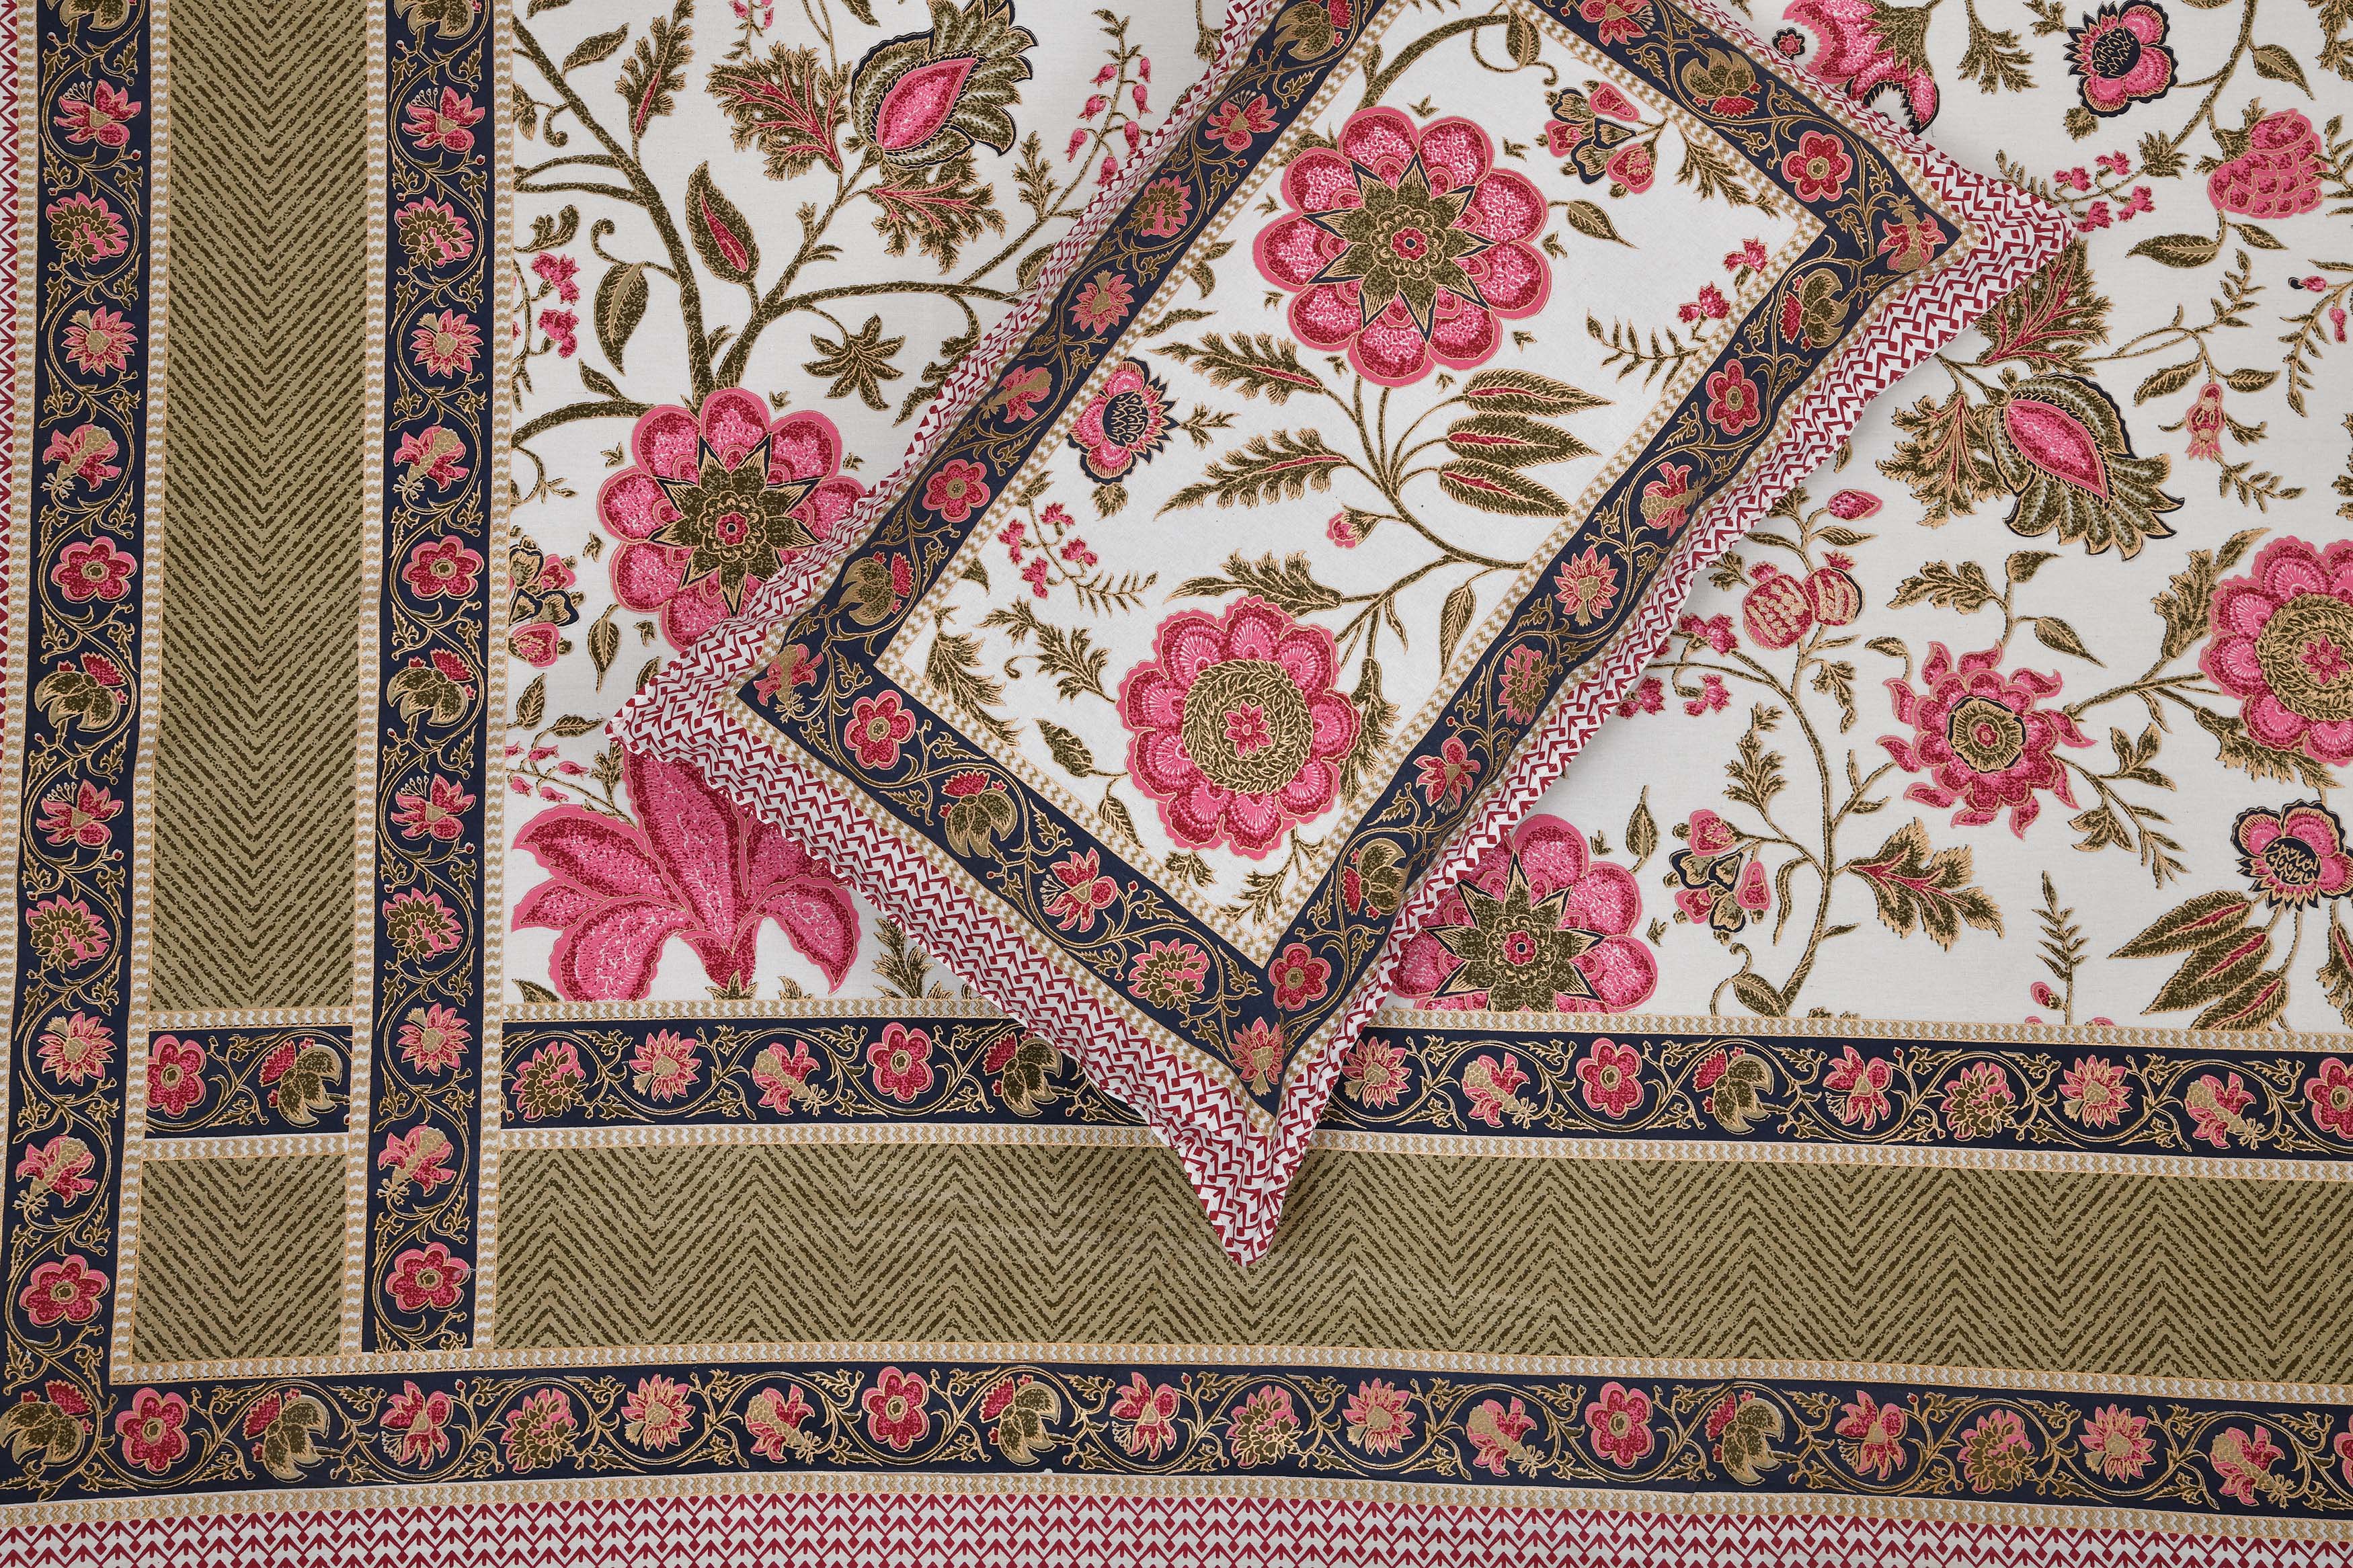 Pure Cotton Printed Bedsheet- Double Bed -Golden Pink Flora